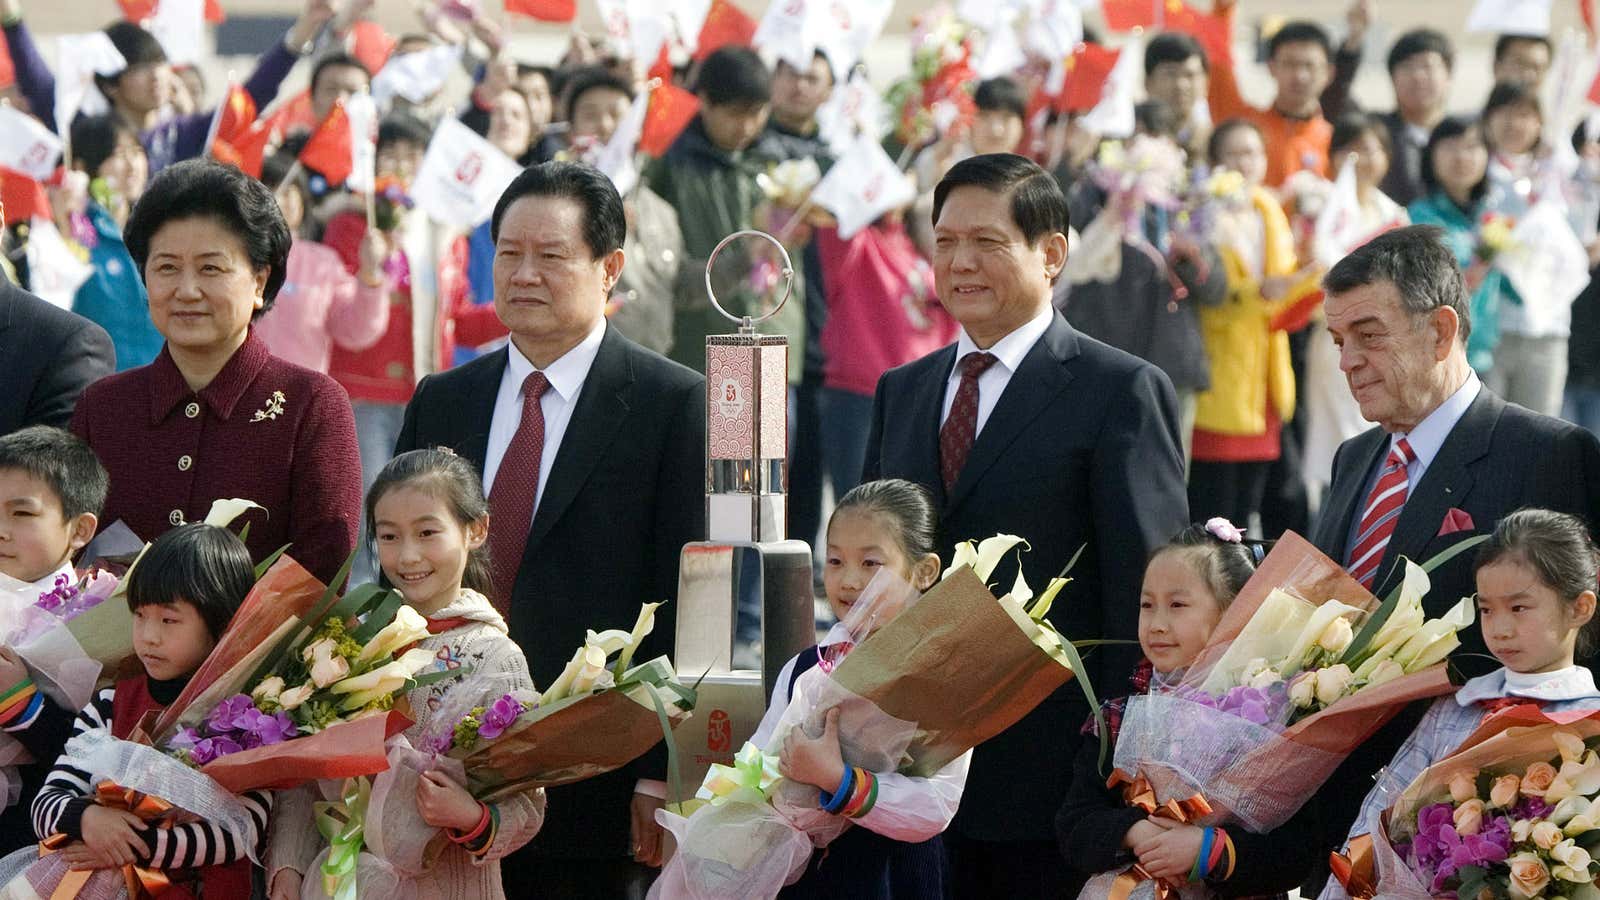 Flower girls and a greeting committee surround Zhou, second from the left, in happier times.